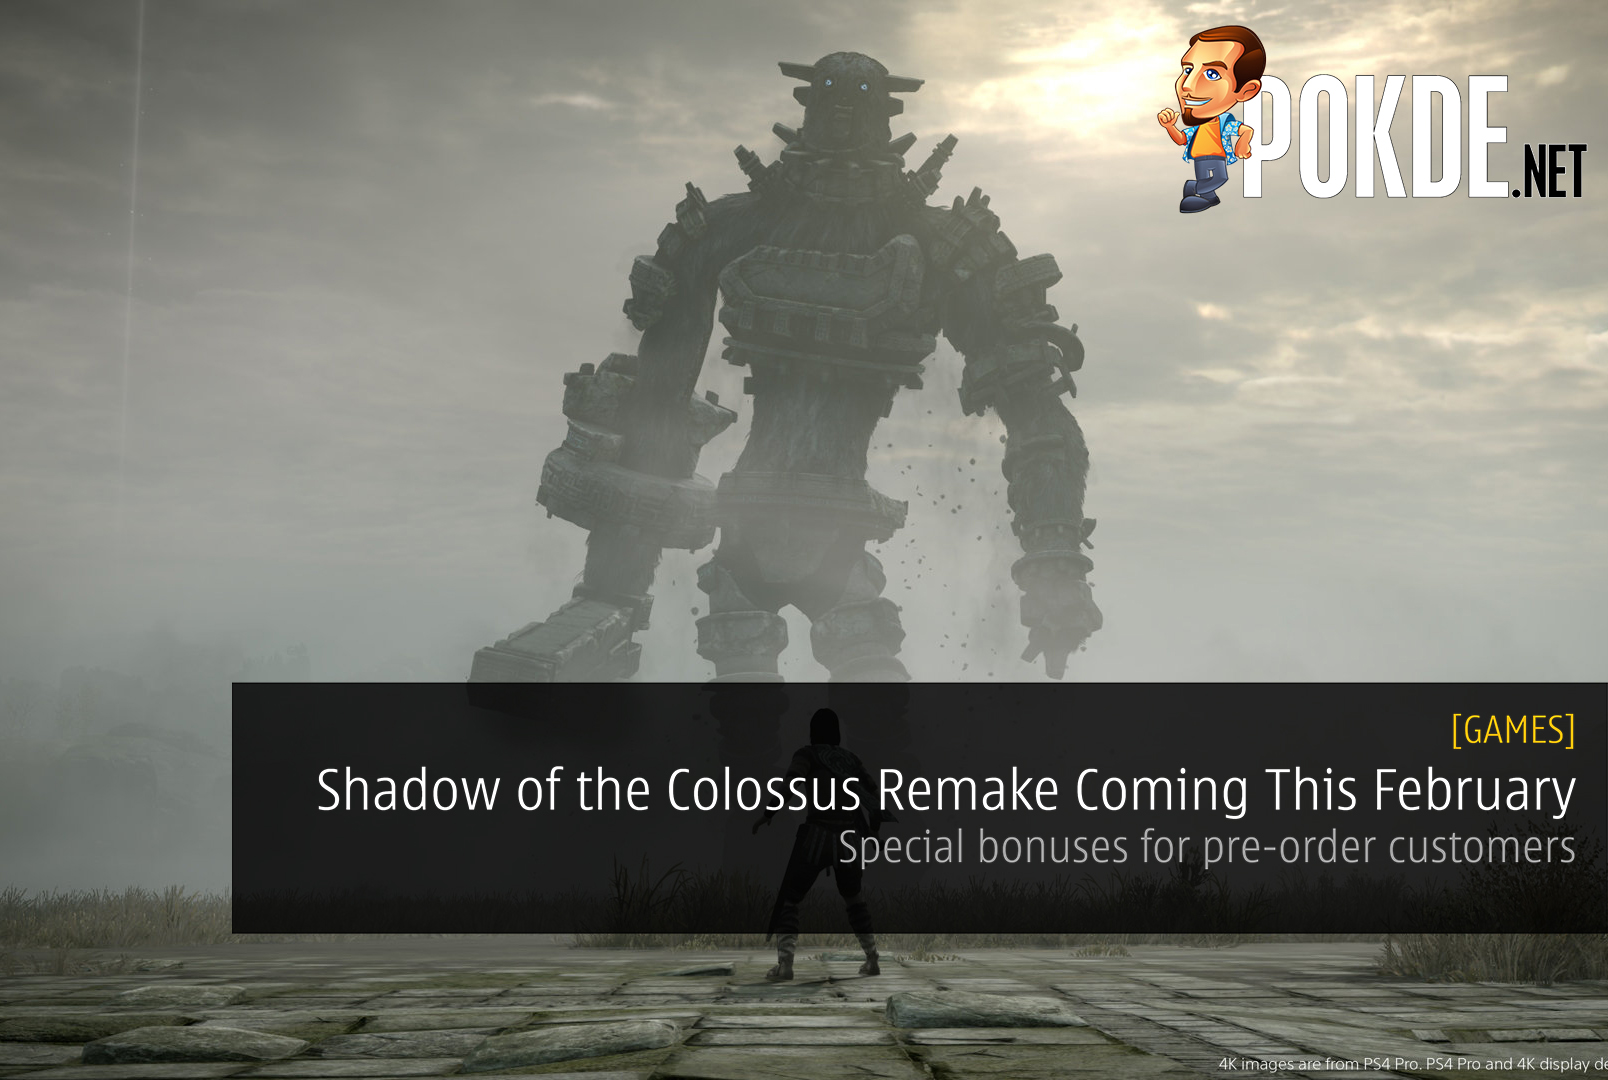 Shadow of the Colossus Remake Coming To The PS4 This February - Special bonuses for pre-order customers 32